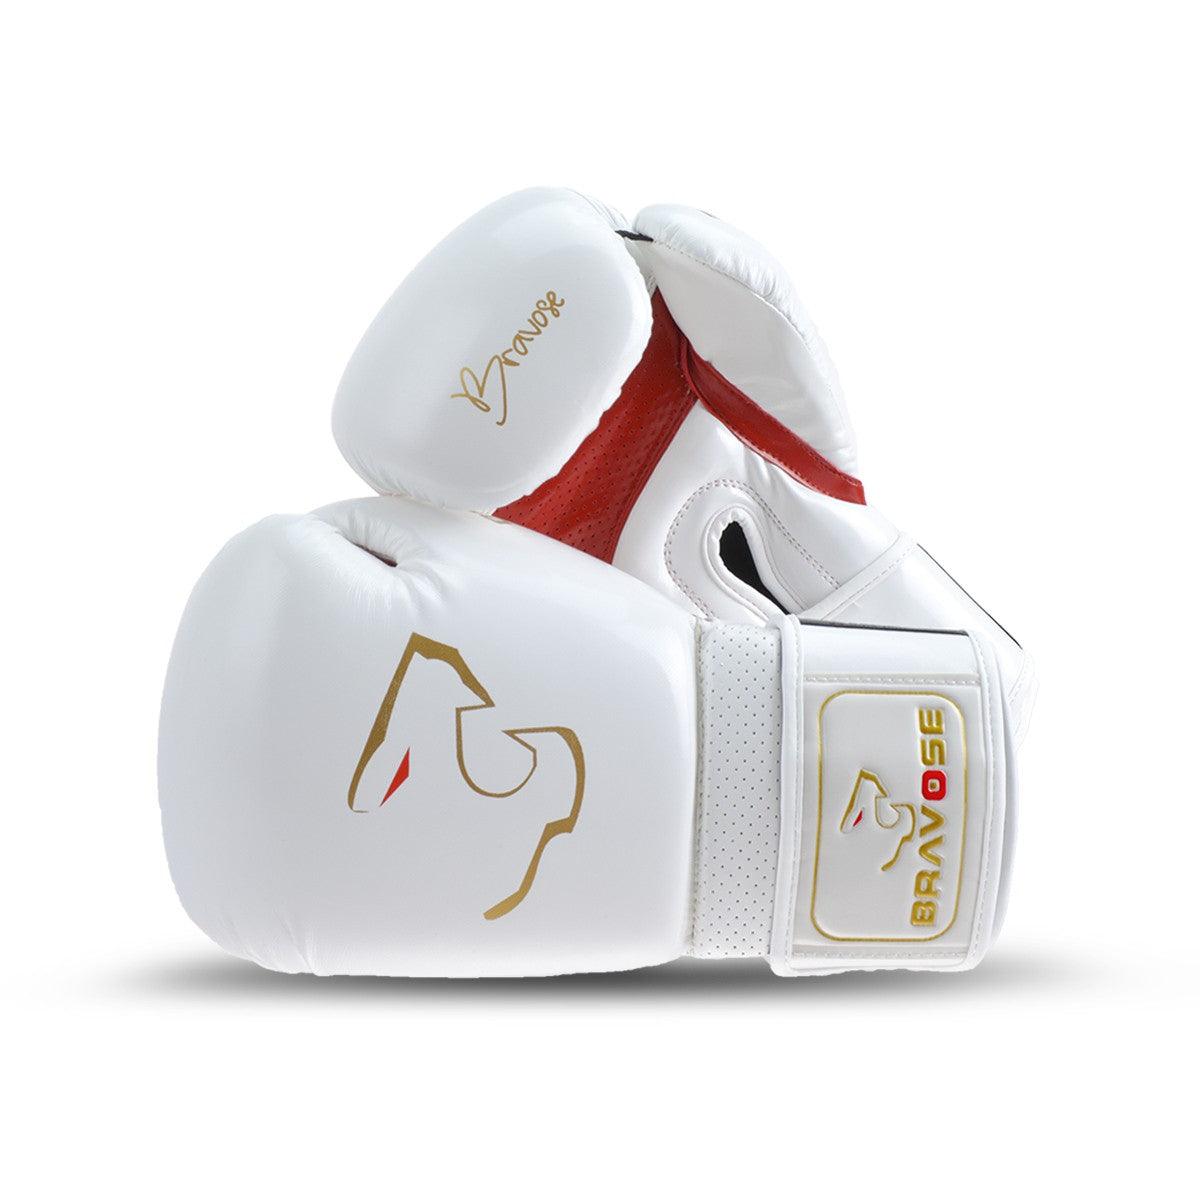 Alpha Premium Quality Boxing Gloves for Bag and Sparring - Bravose